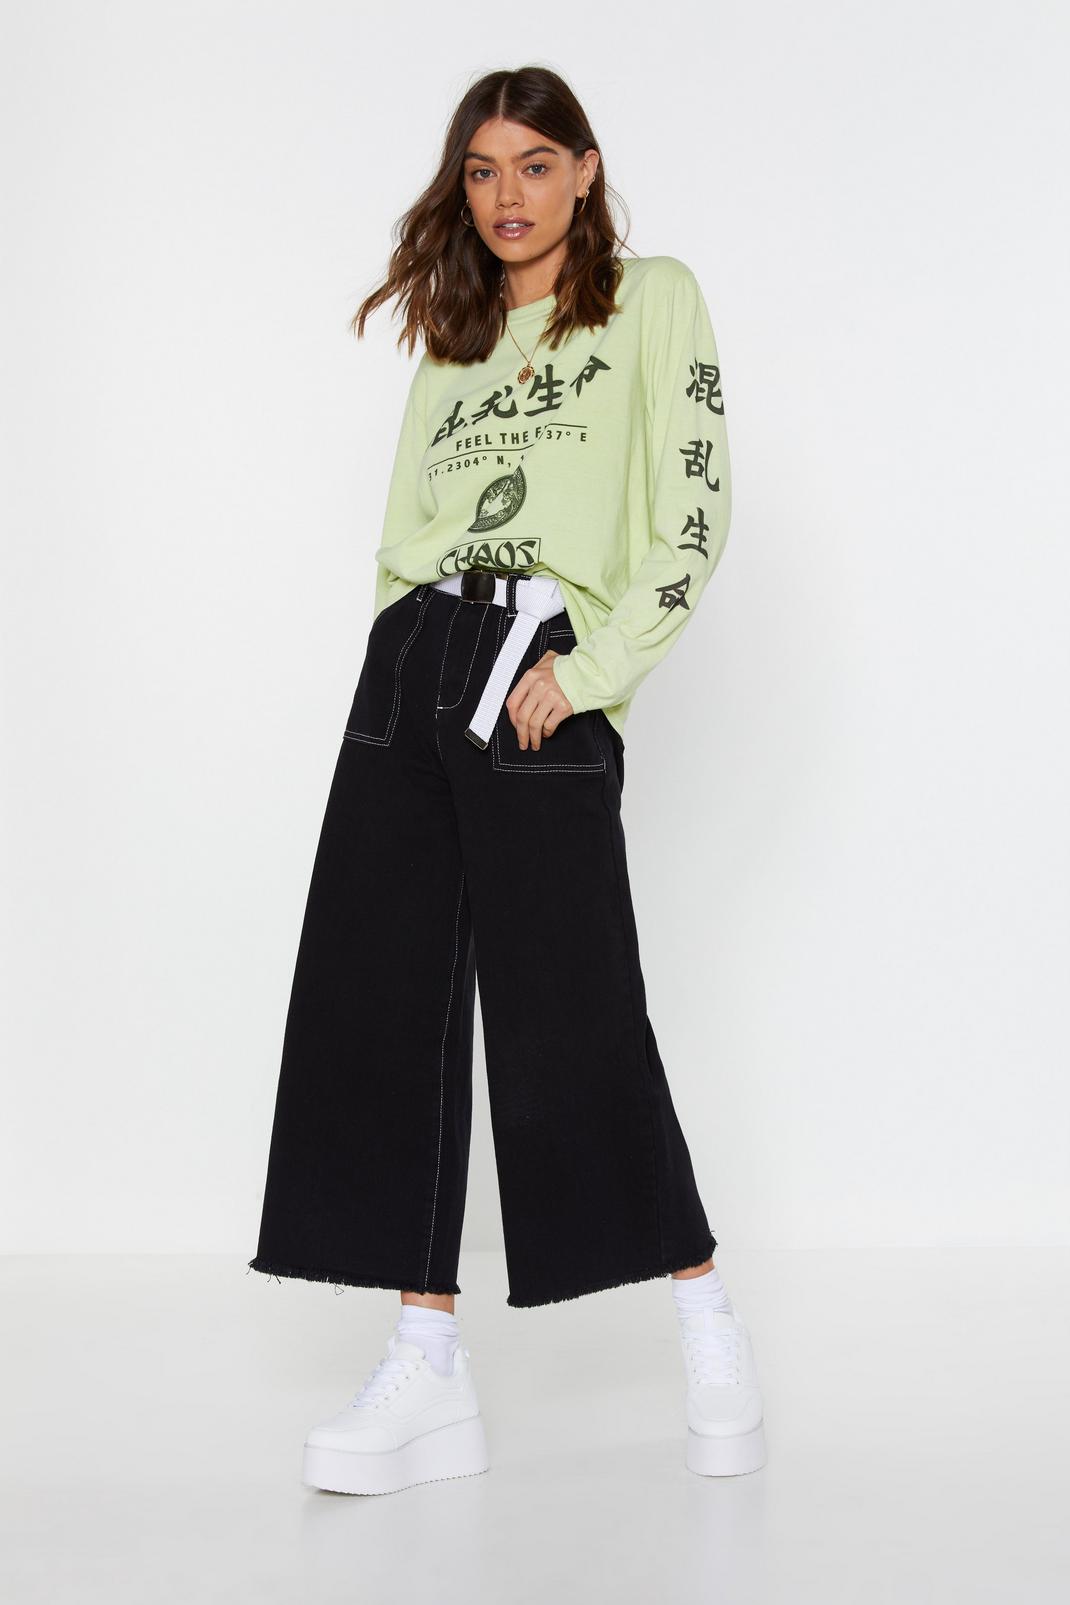 Feel the Fire East Asian Graphic Tee | Nasty Gal